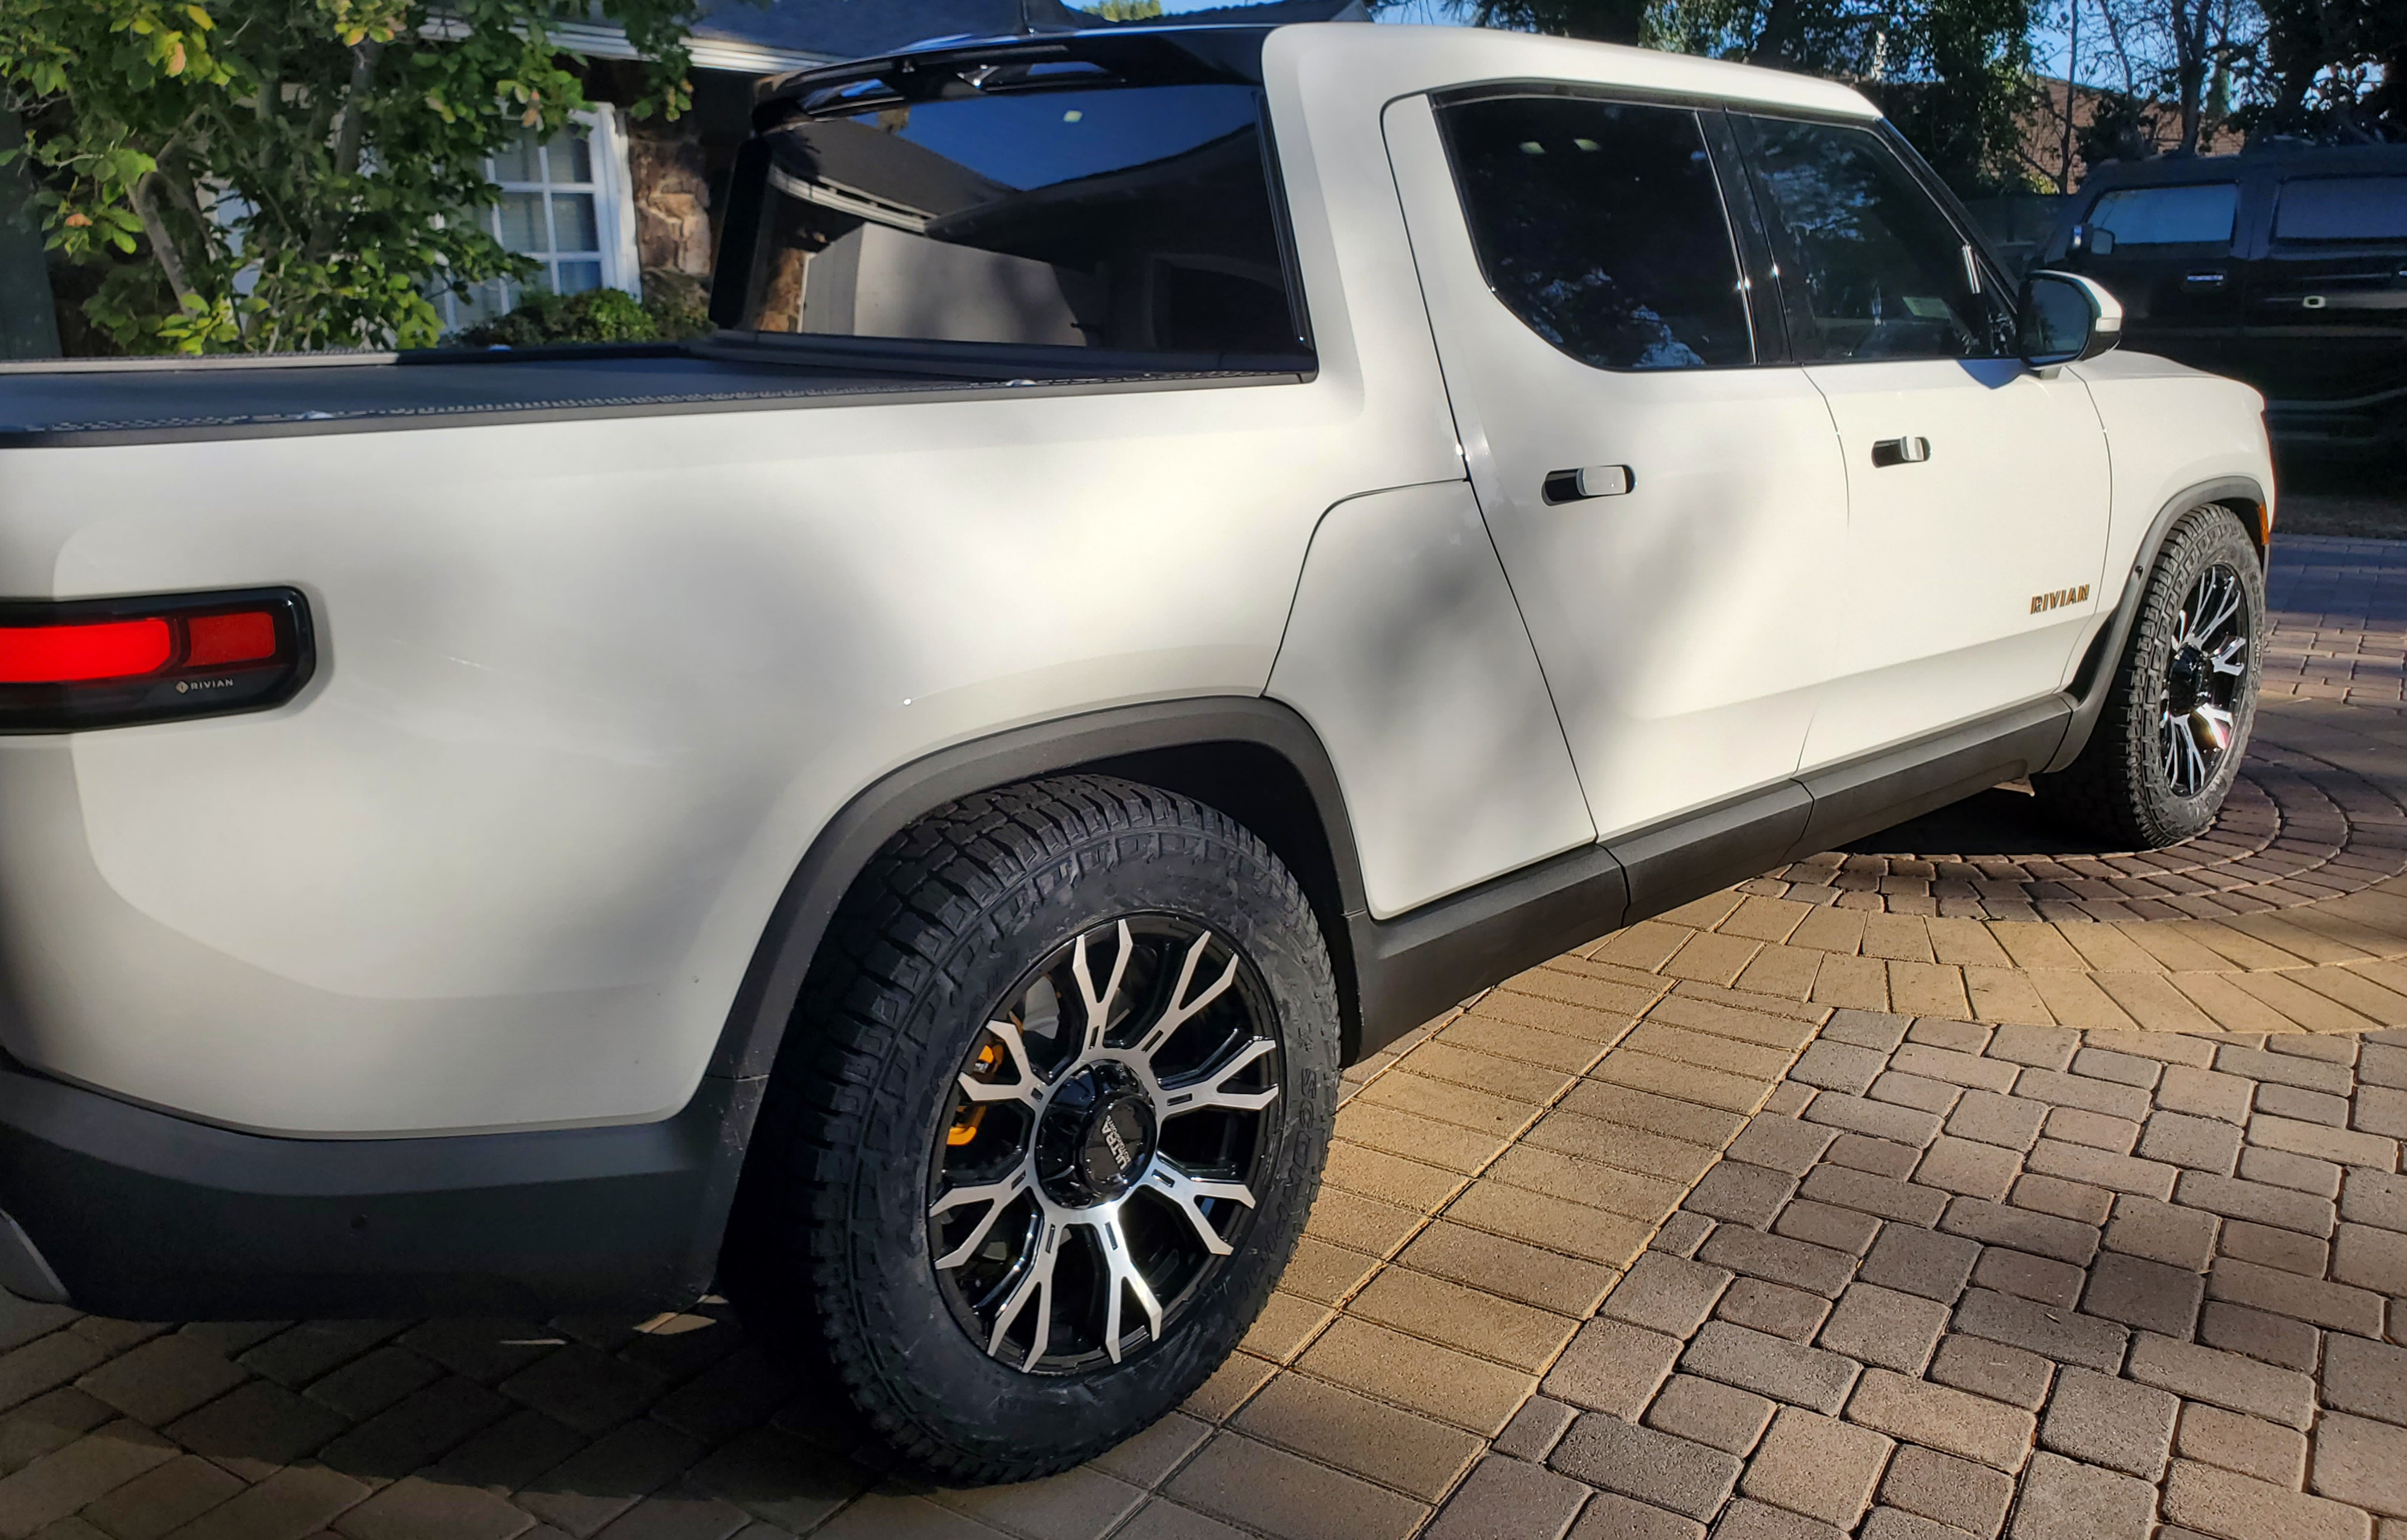 Rivian R1T R1S UPDATED - New Custom Wheels / Tires 20x9, 18mm offset, with 275/60/20 Pirelli's (33") - NO RUBBING 1657323753031